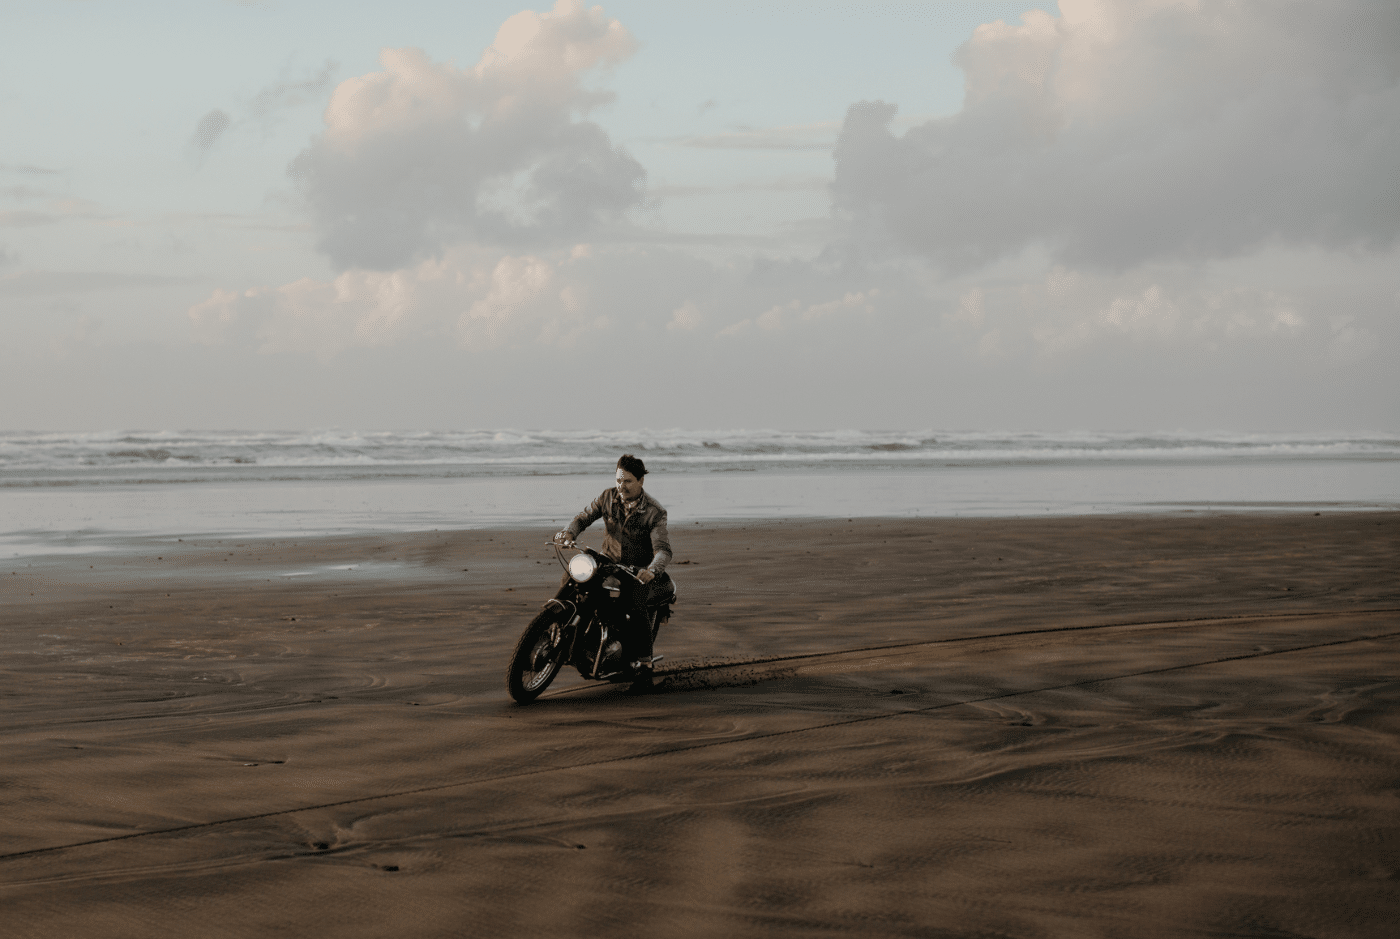 A man rides a motorcycle on a sandy beach at sunset.